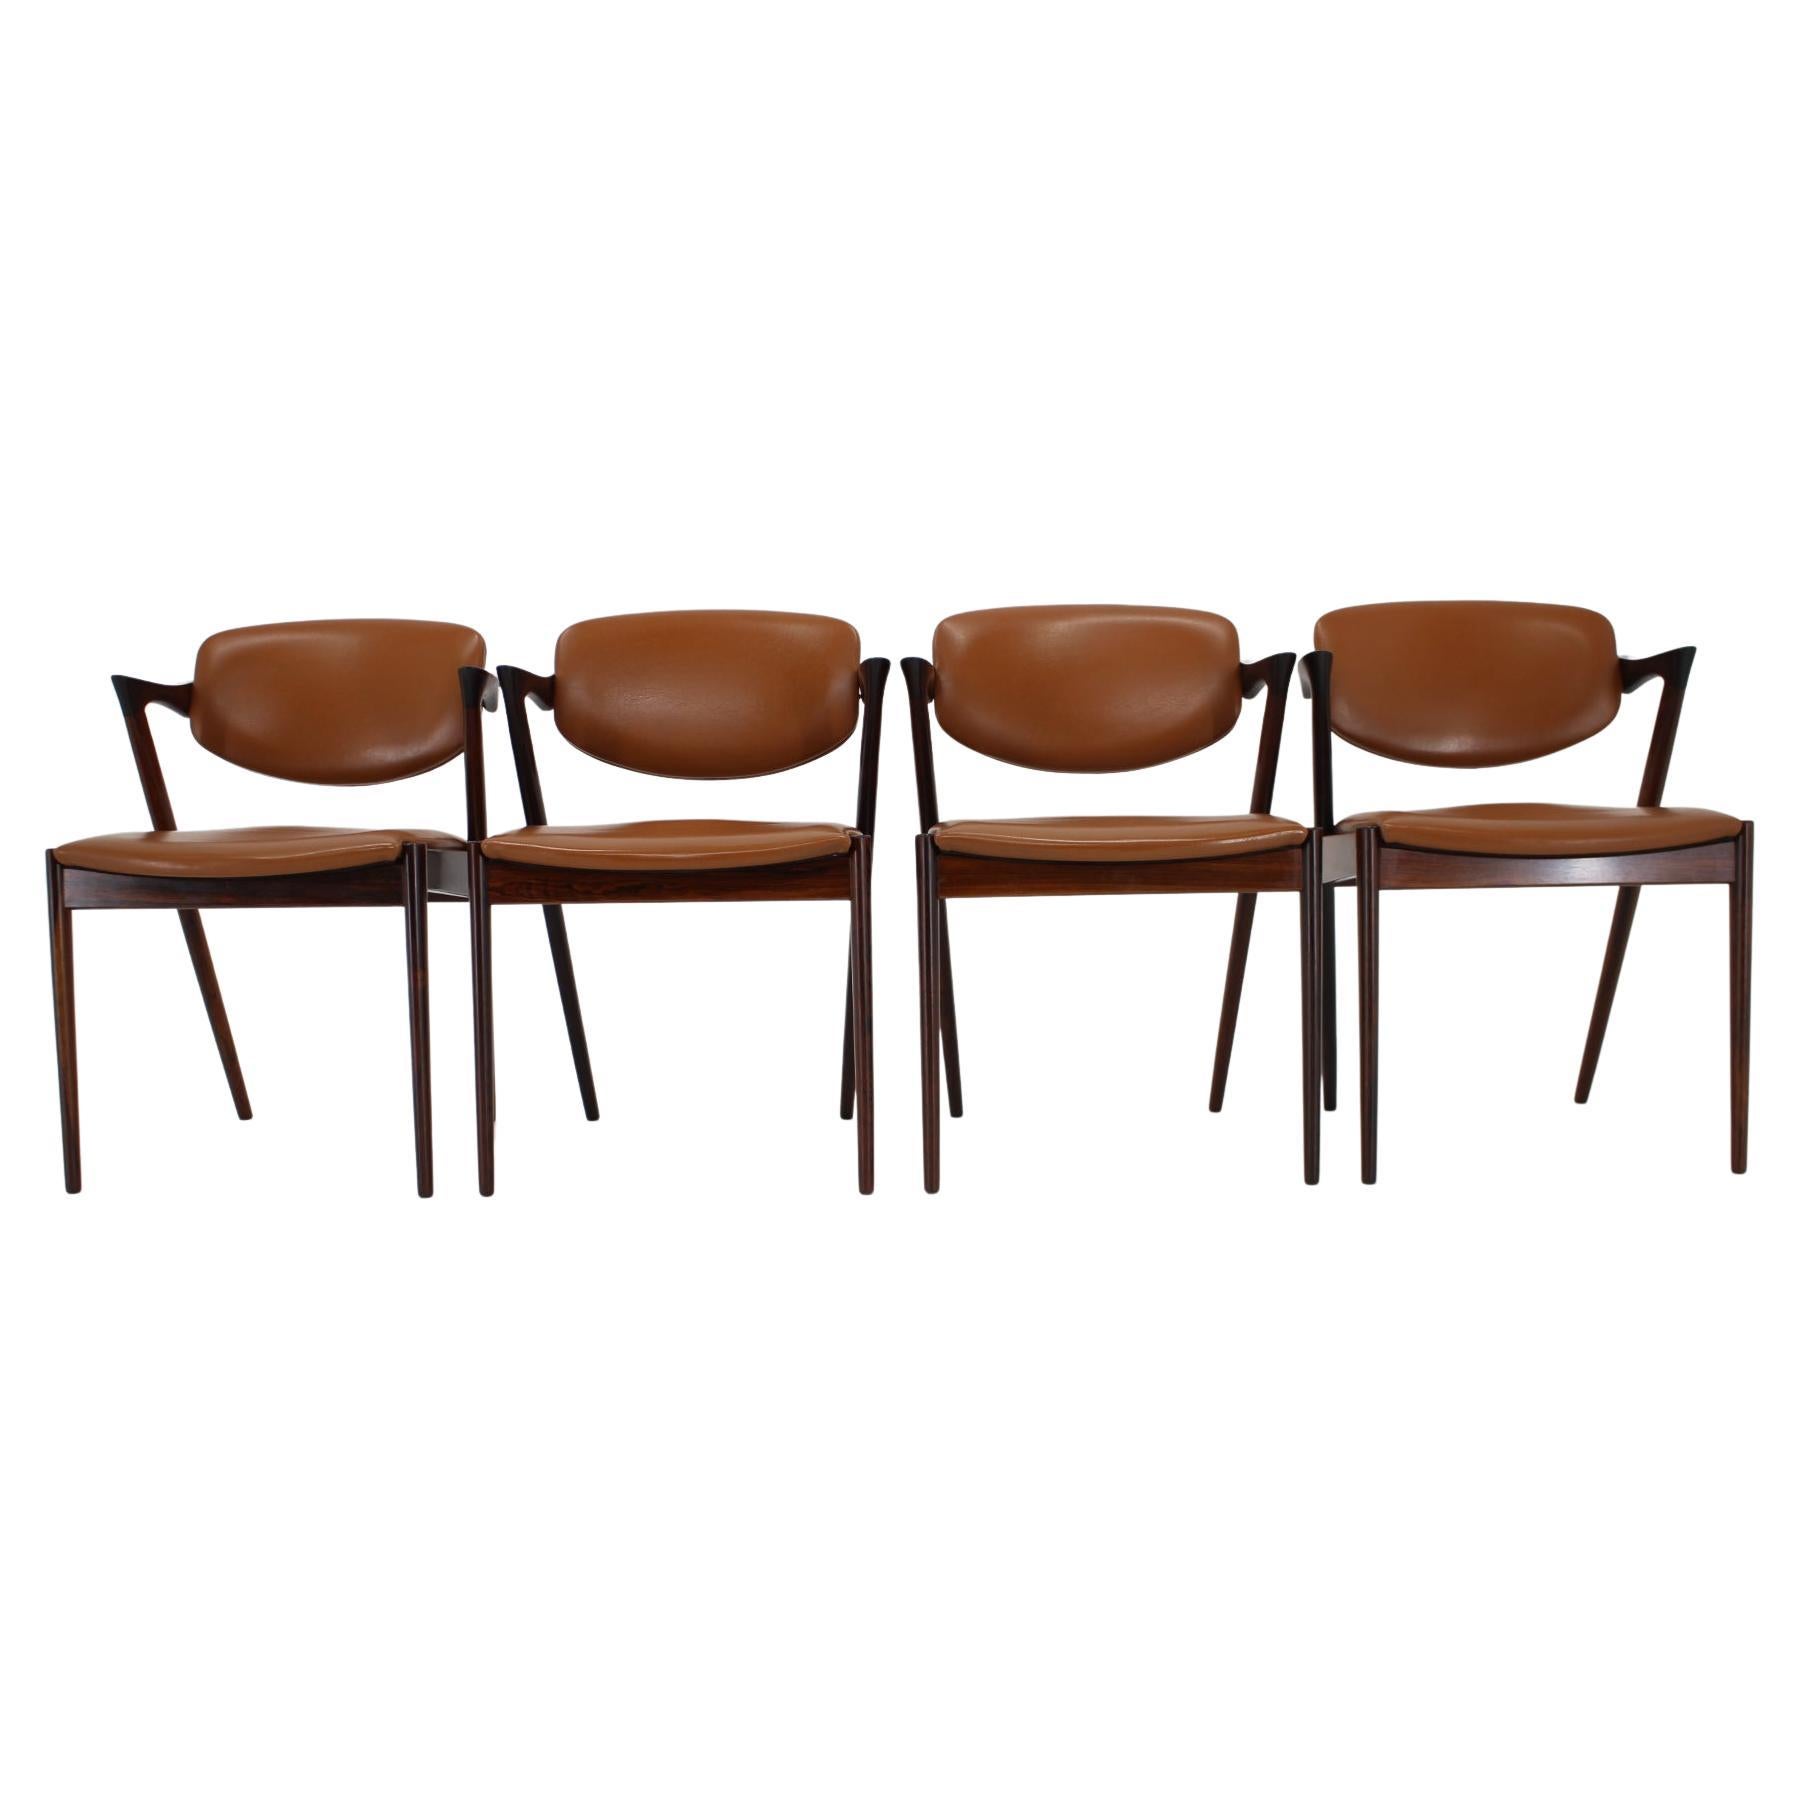 1960s Kai Kristiansen Model 42 Dining Chairs in Palisander, set of 4 For Sale